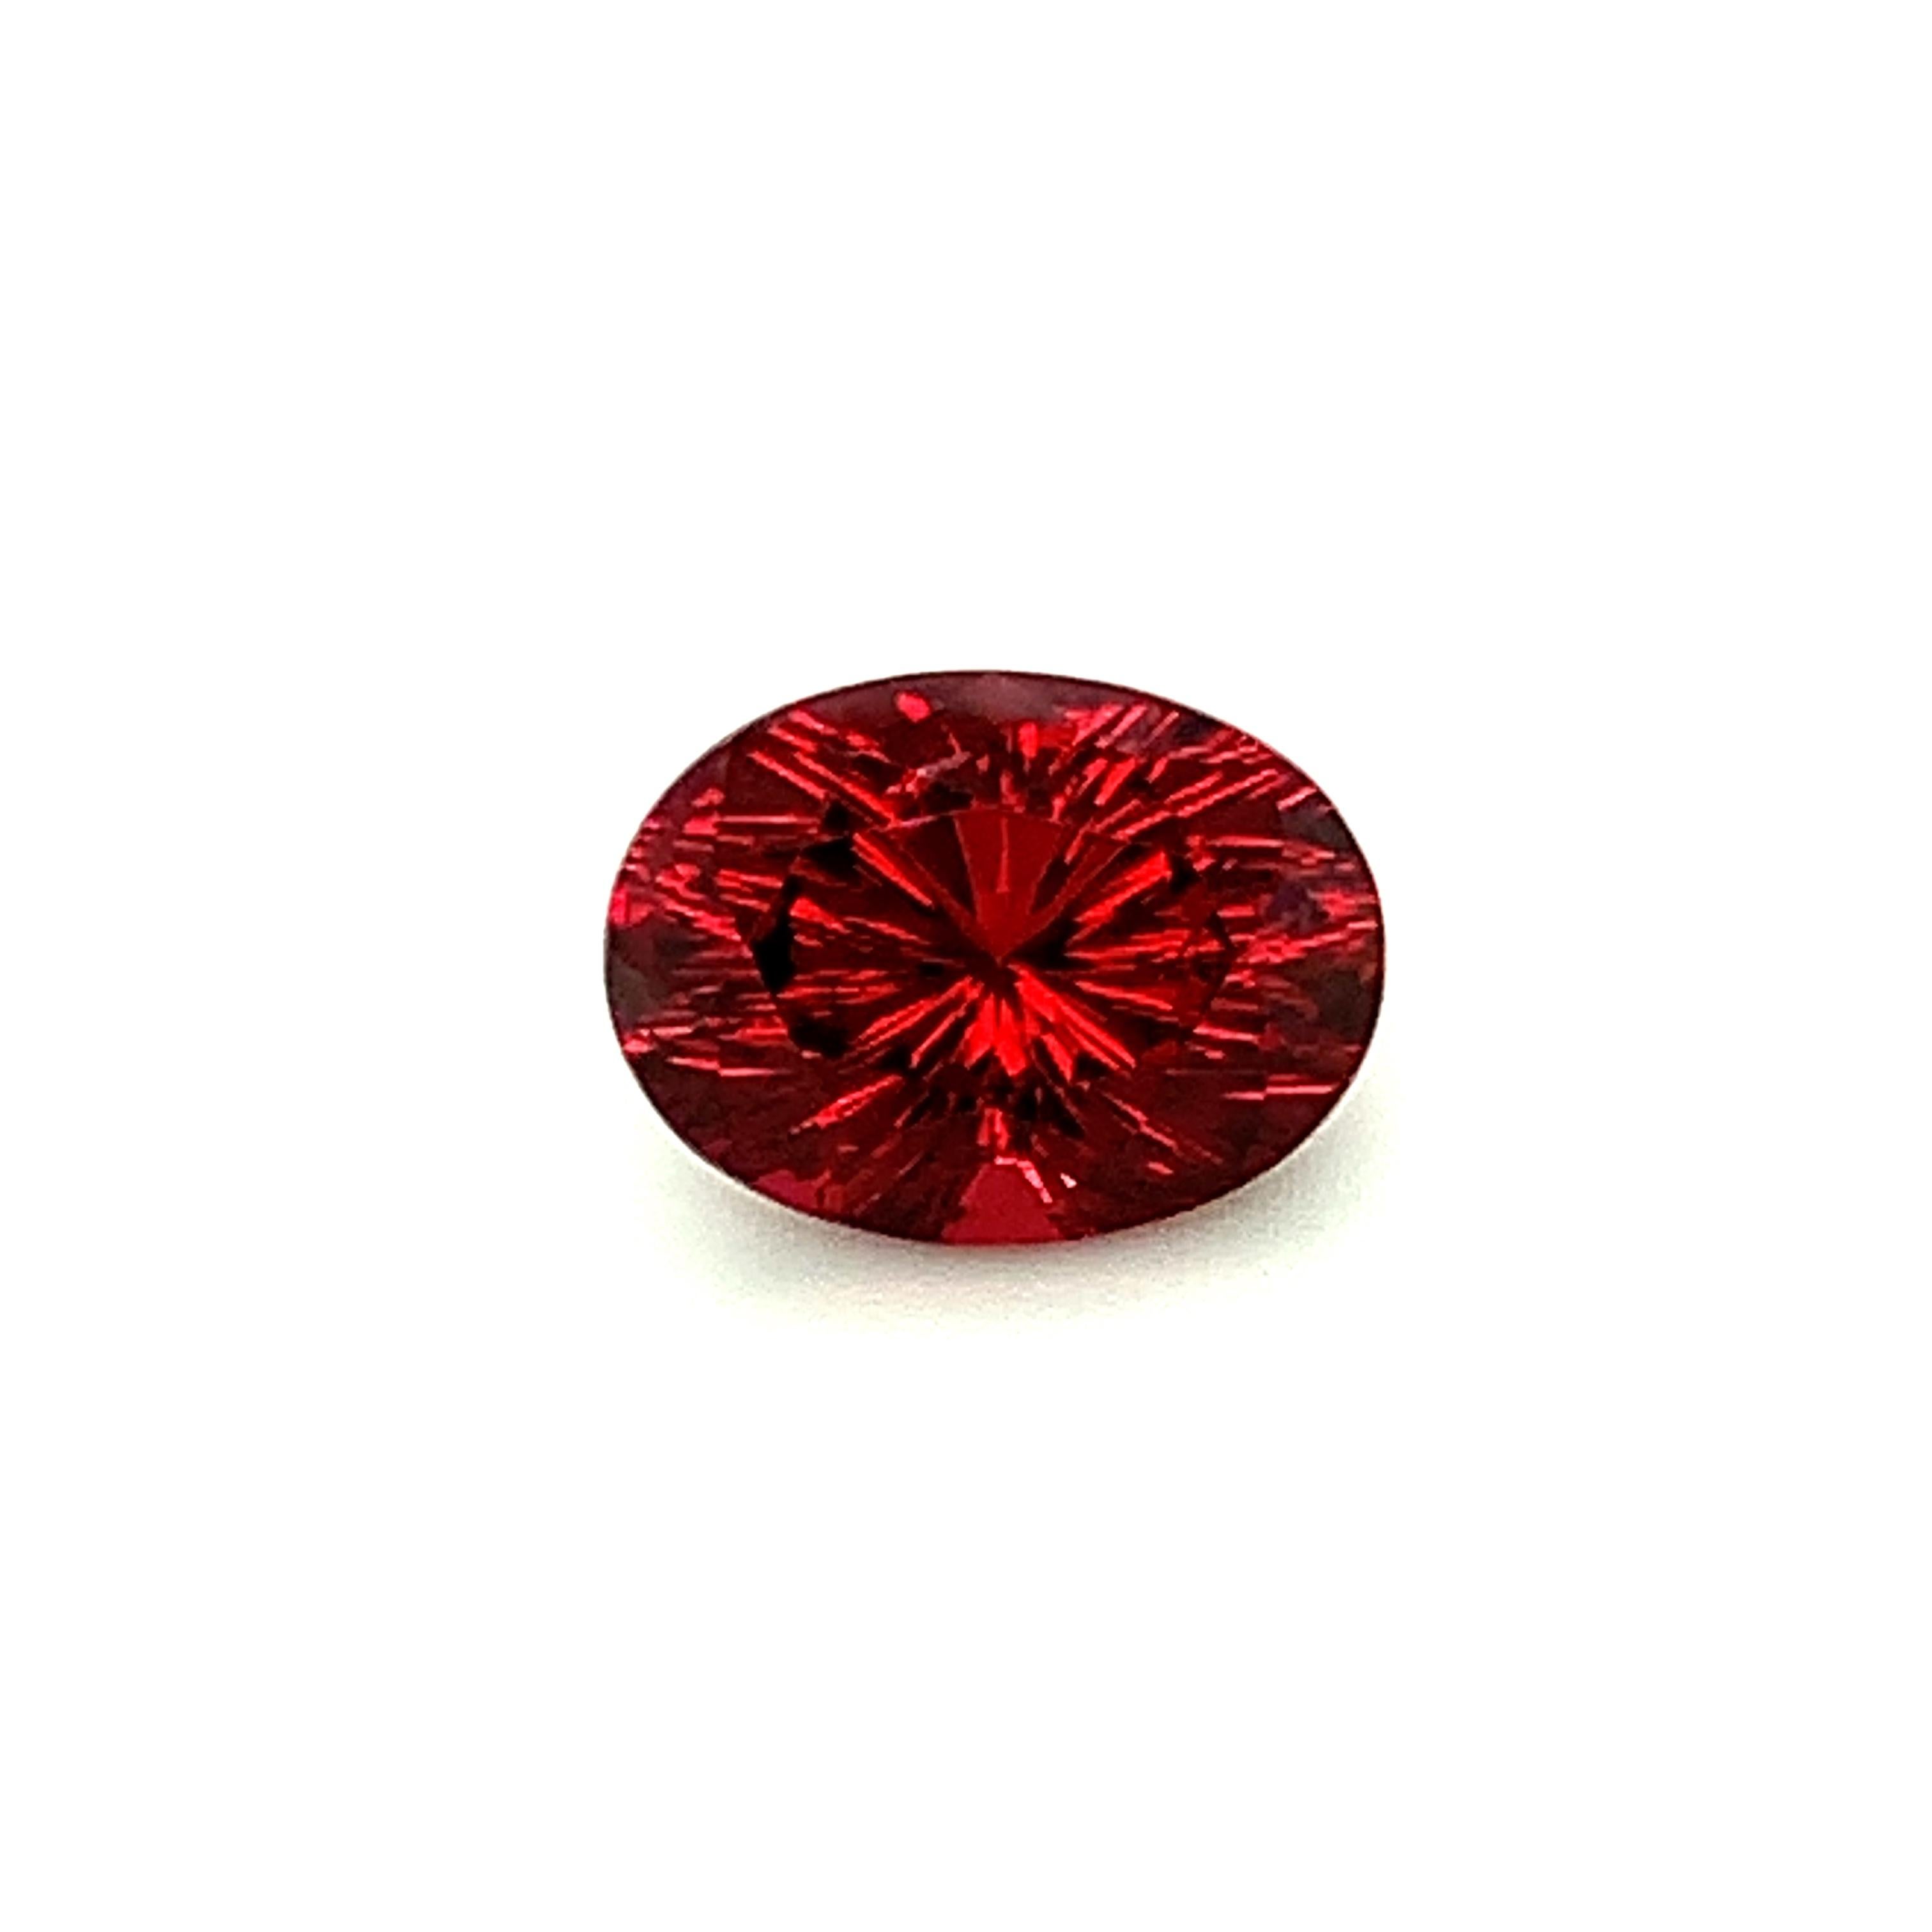 Details about   9 Pcs Red Spinel 1.85 Ct/3 mm 100% Natural Round Cut Gemstone Lot Certified SC12 